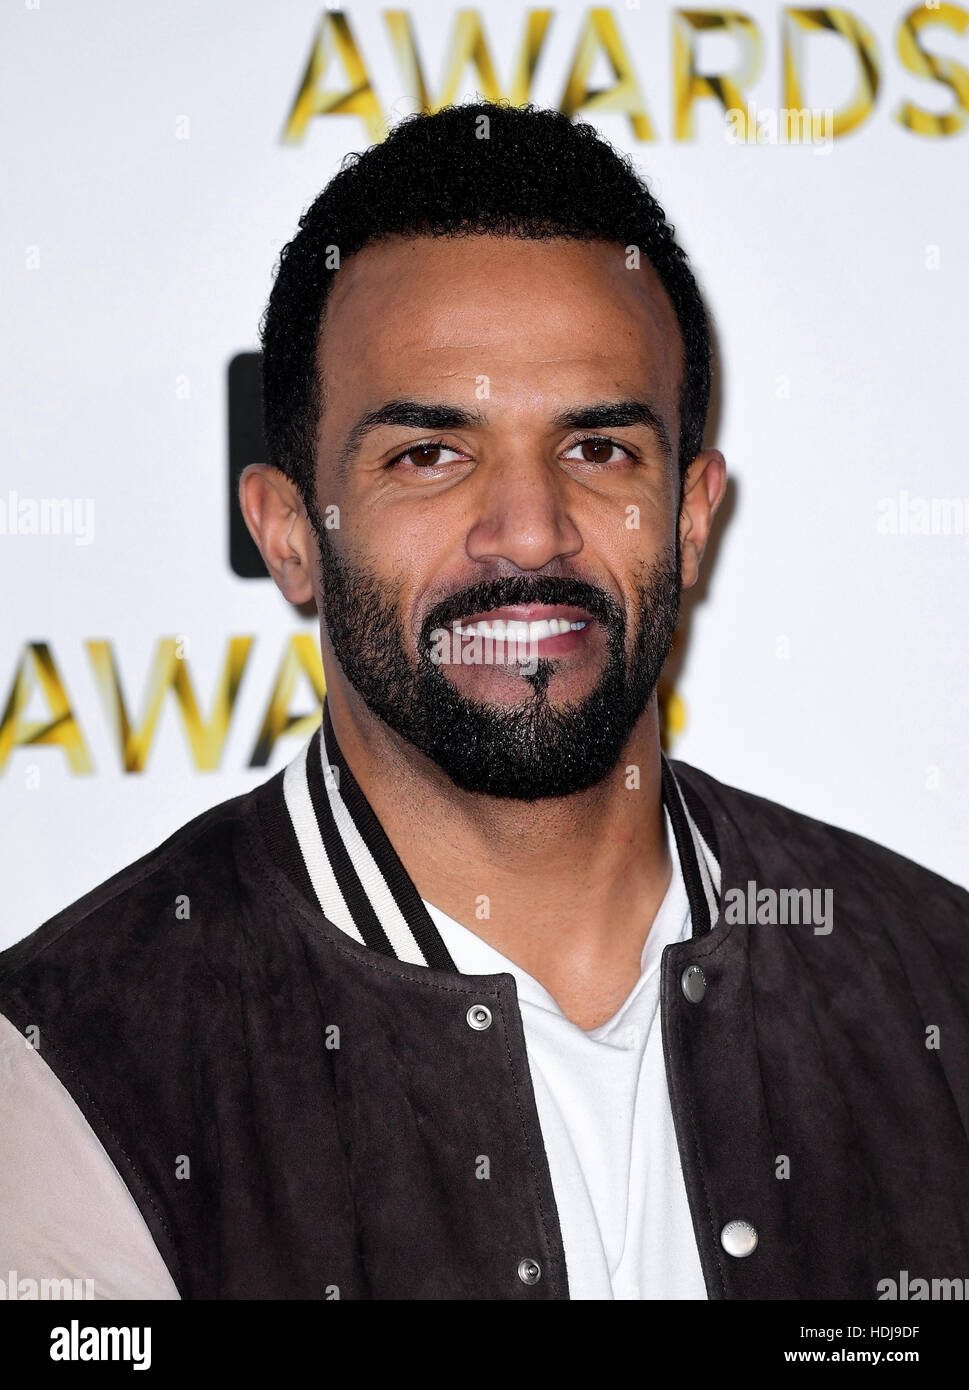 Craig David attending the BBC Music Awards at the Royal Victoria Dock, London. PRESS ASSOCIATION Photo. Picture date: Monday 12th December, 2016. See PA Story SHOWBIZ Music. Photo credit should read: Ian West/PA Wire Stock Photo